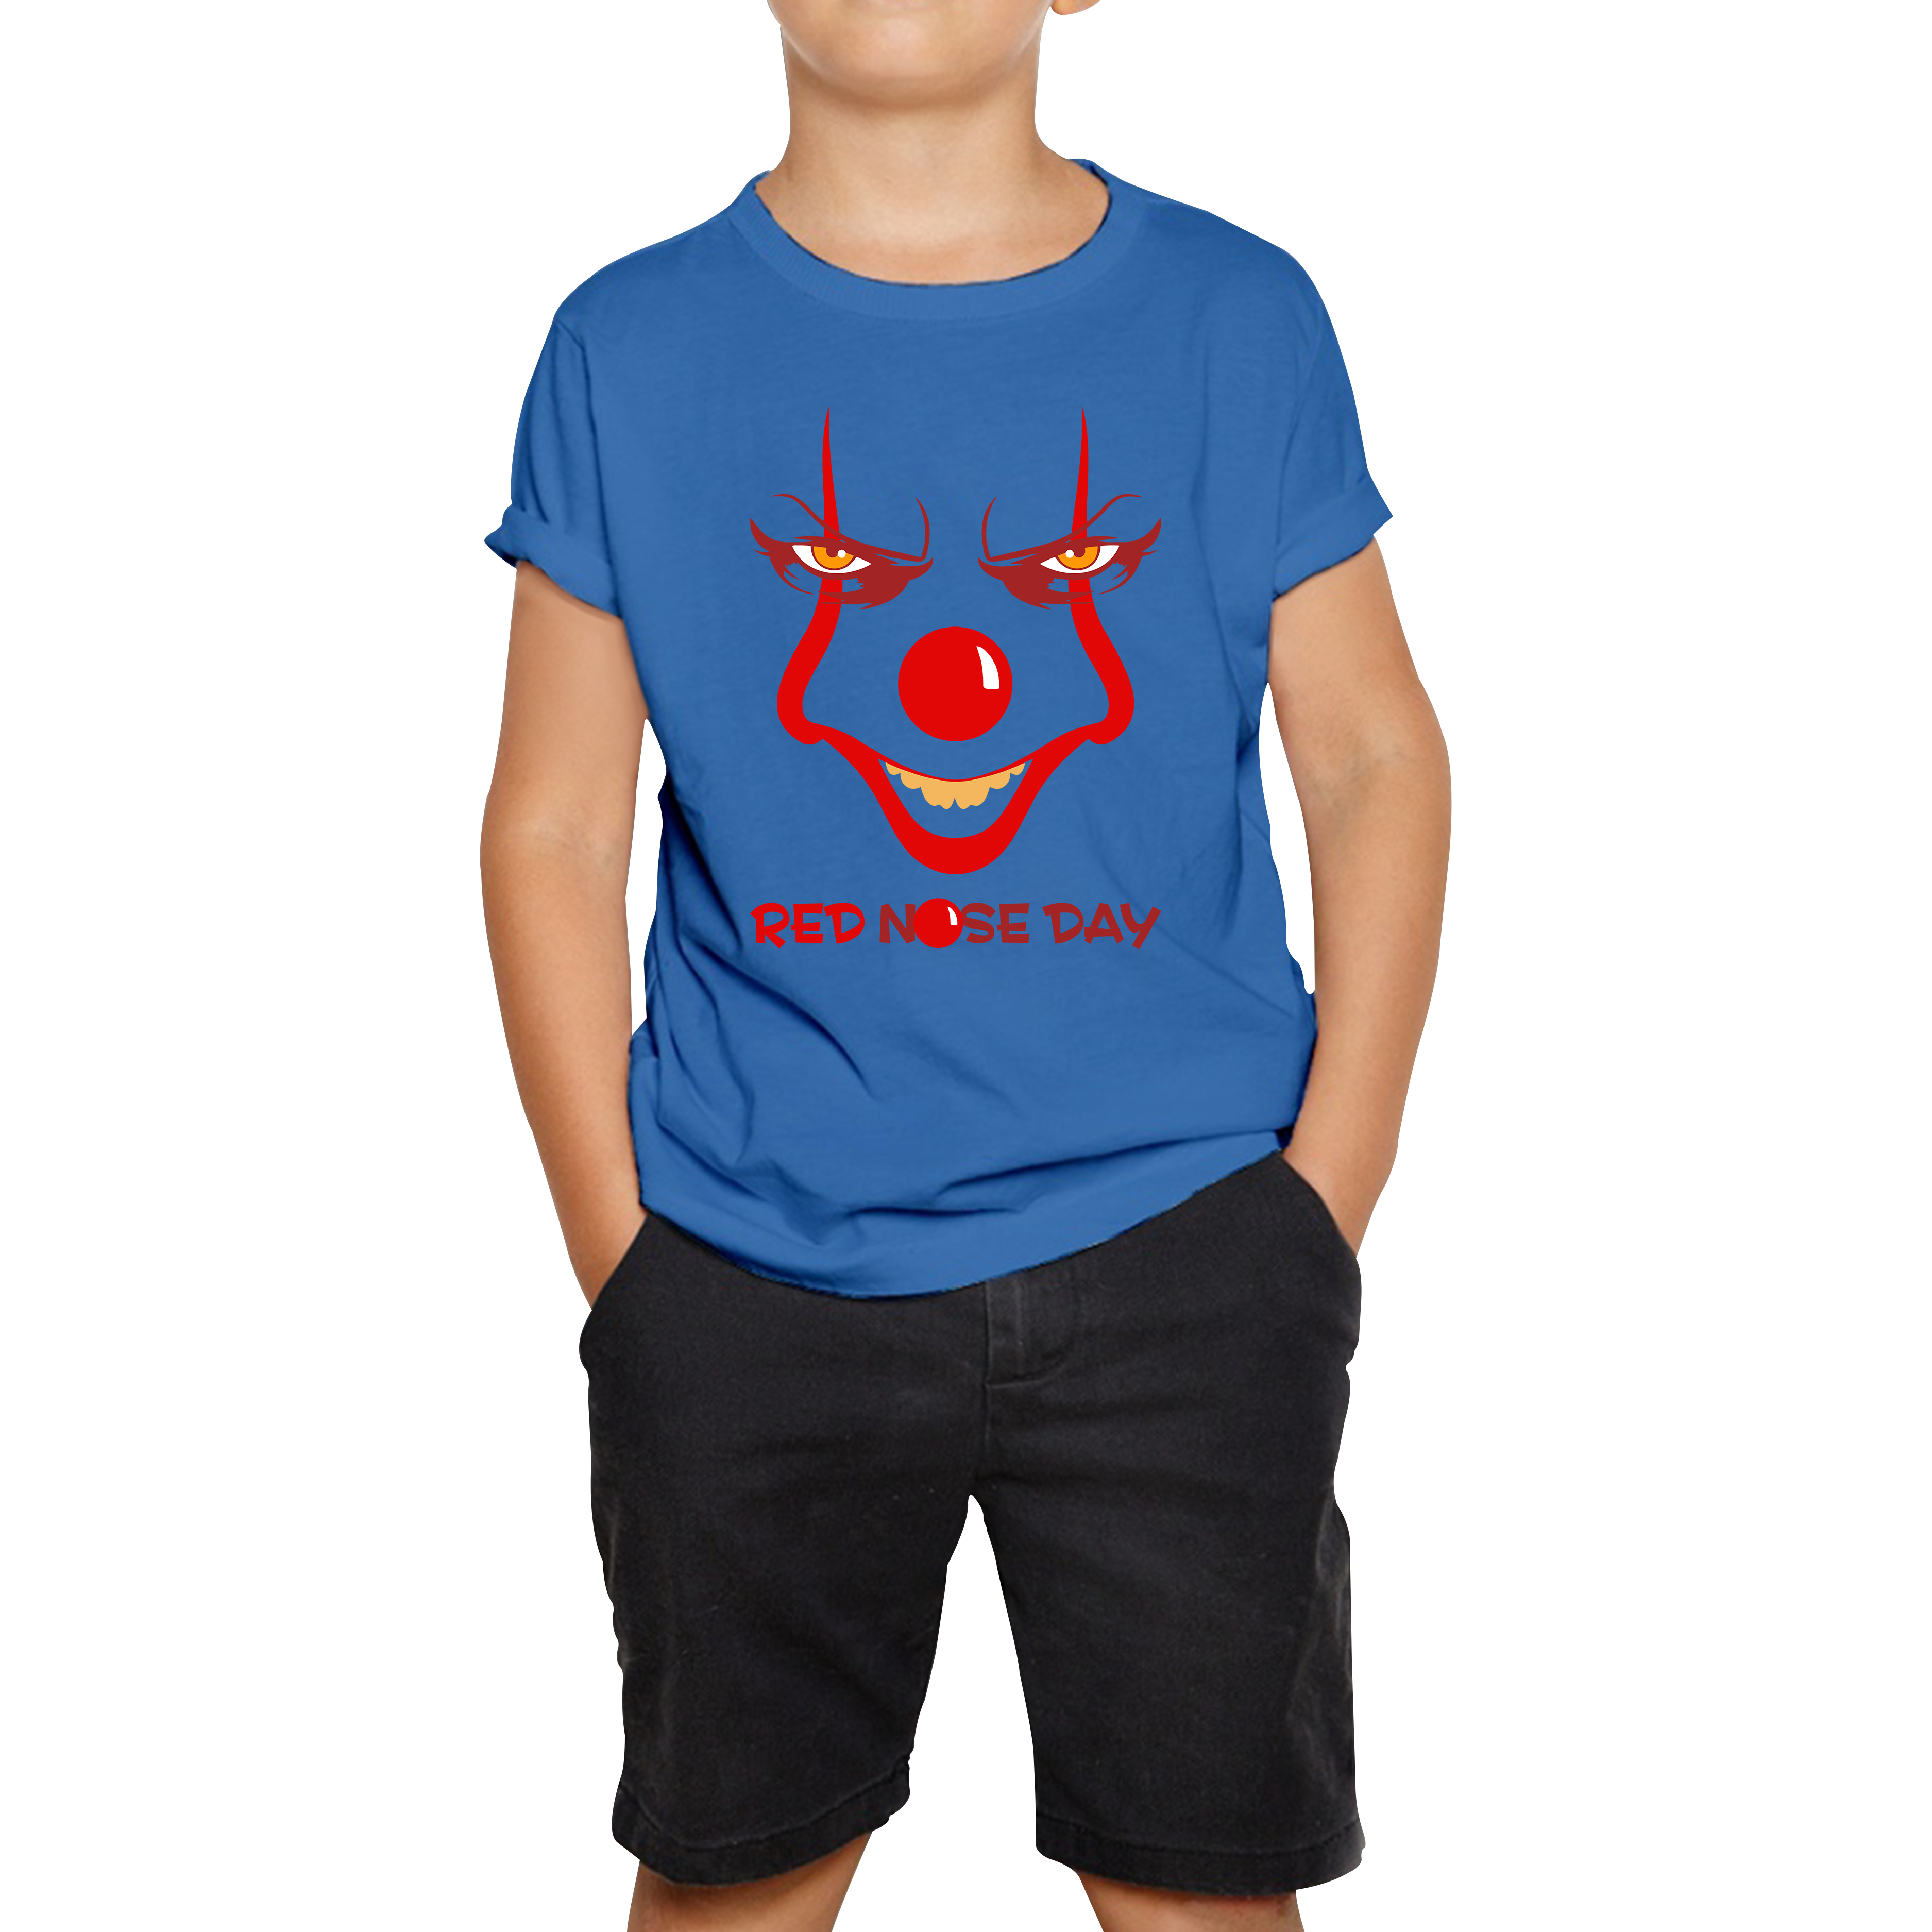 Pennywise Clown Face Red Nose Day Funny Comic Relief Kids T Shirt. 50% Goes To Charity